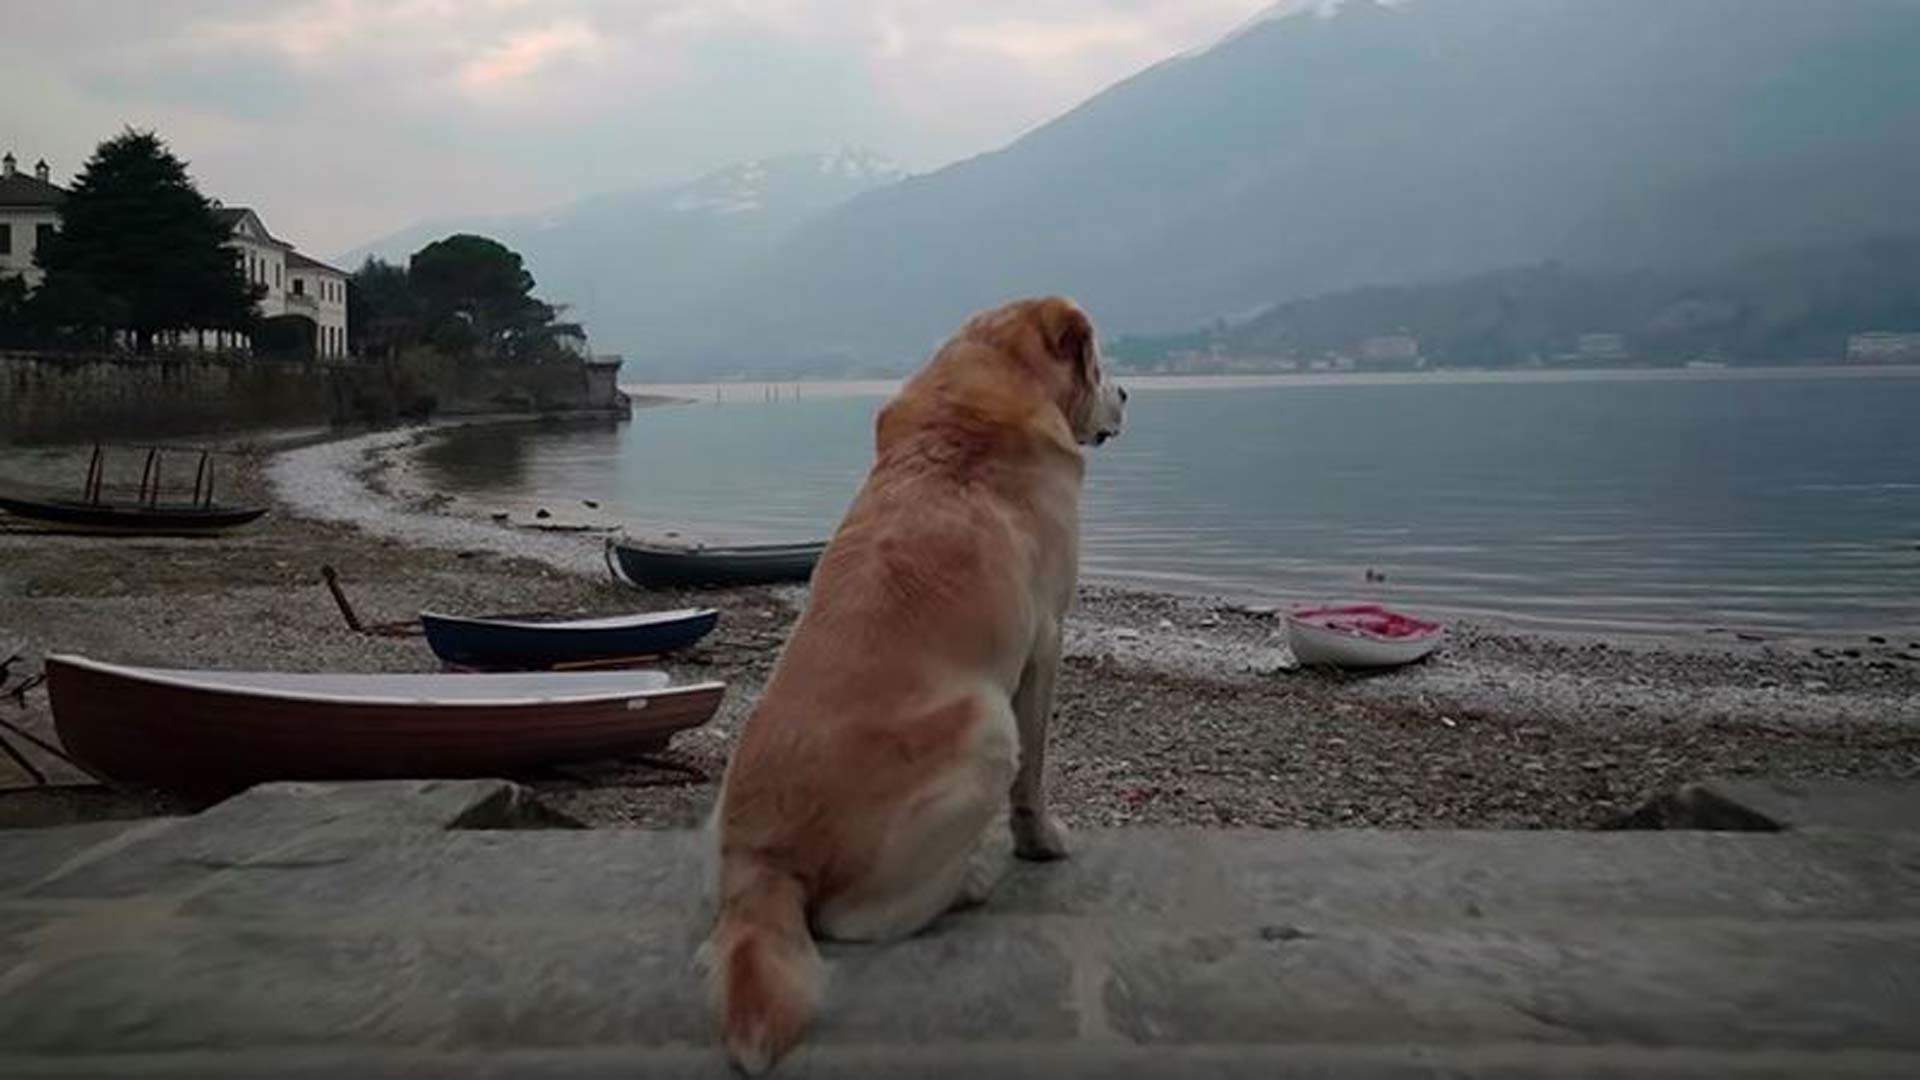 Netflix Is Bringing Its Endearing 'Dogs' Docuseries Back for a Second Season